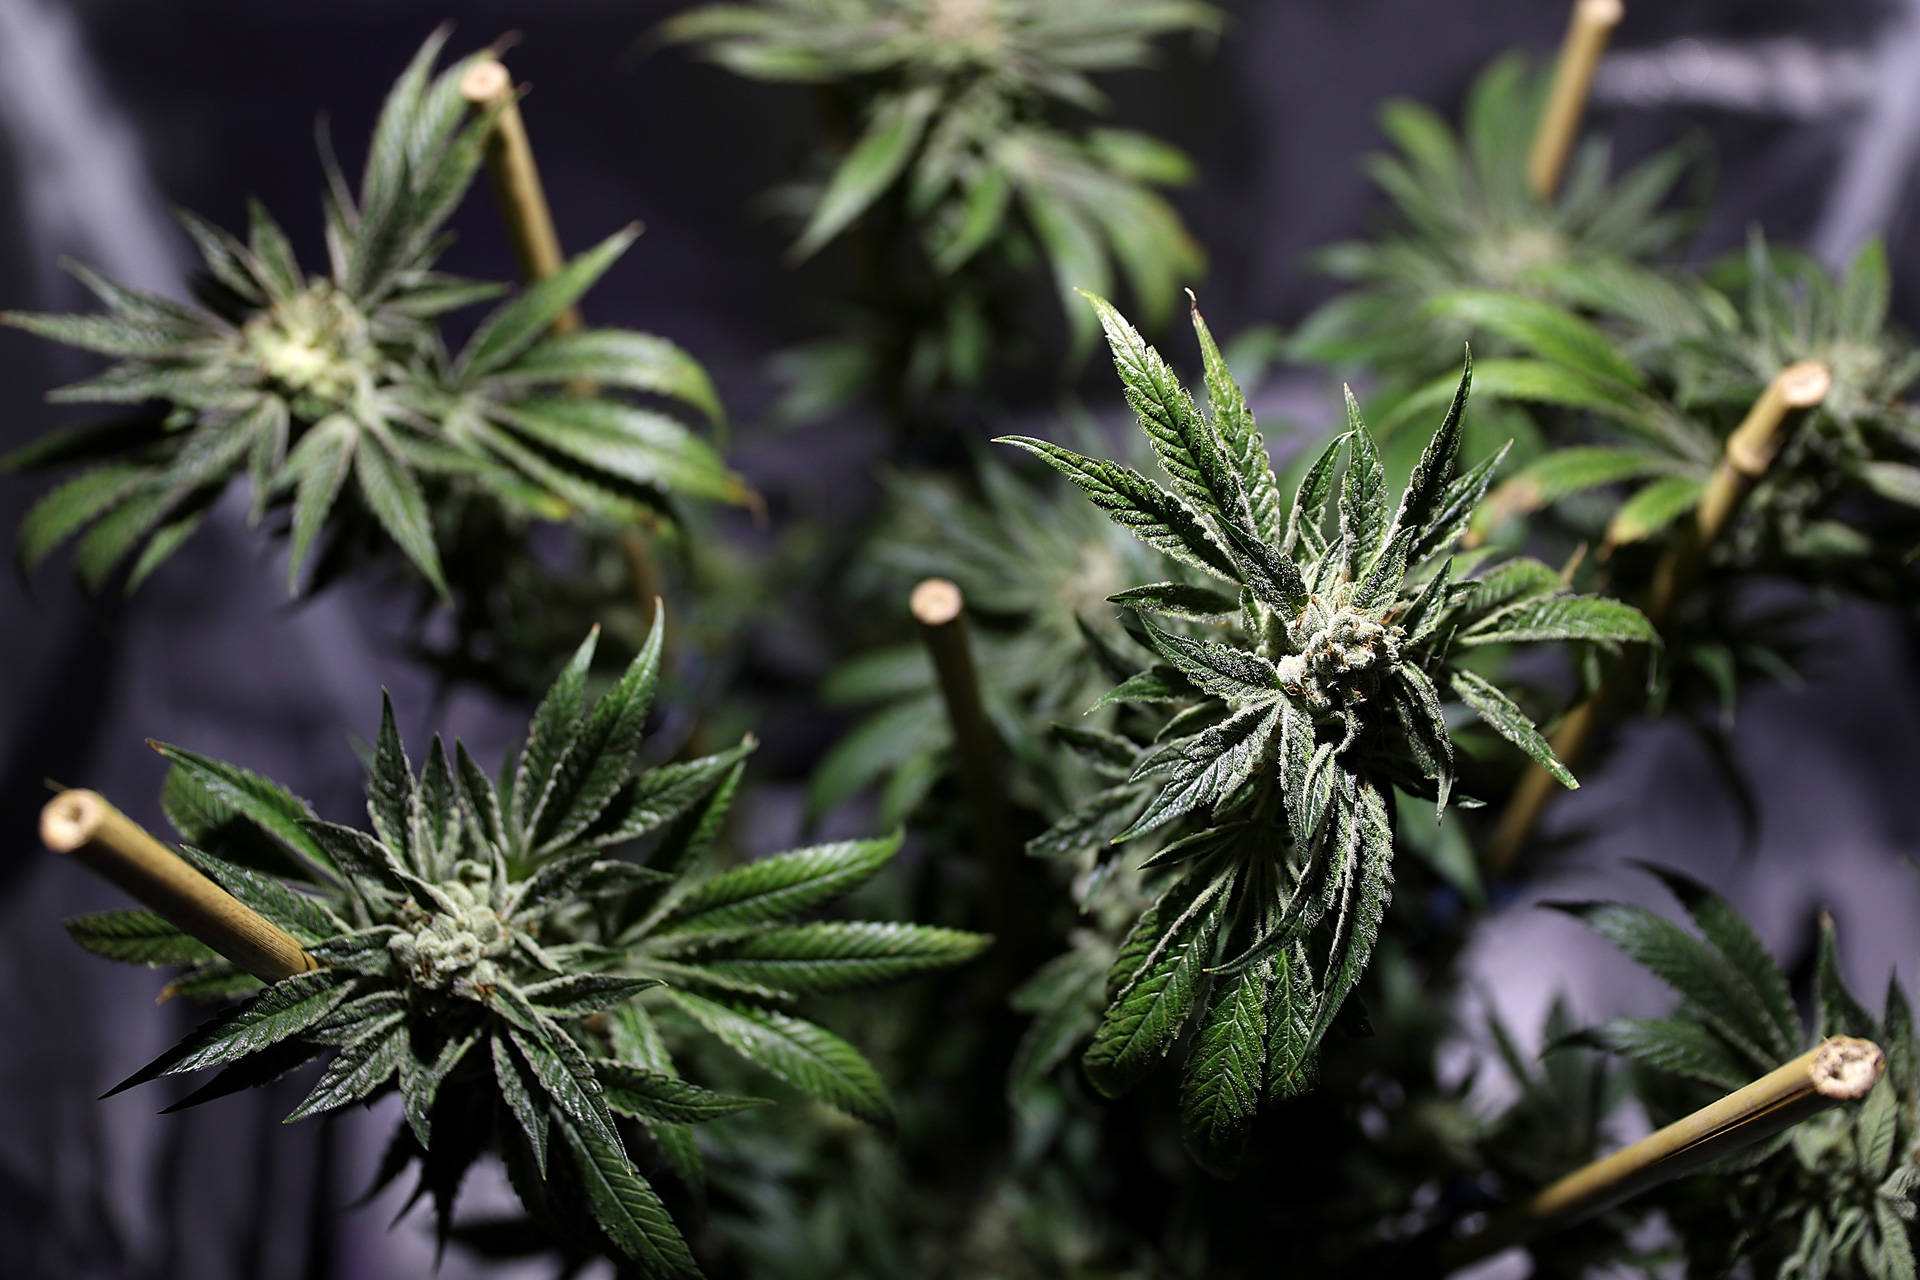 Marijuana plants on display at a cannabis expo in Oakland. Justin Sullivan/Getty Images